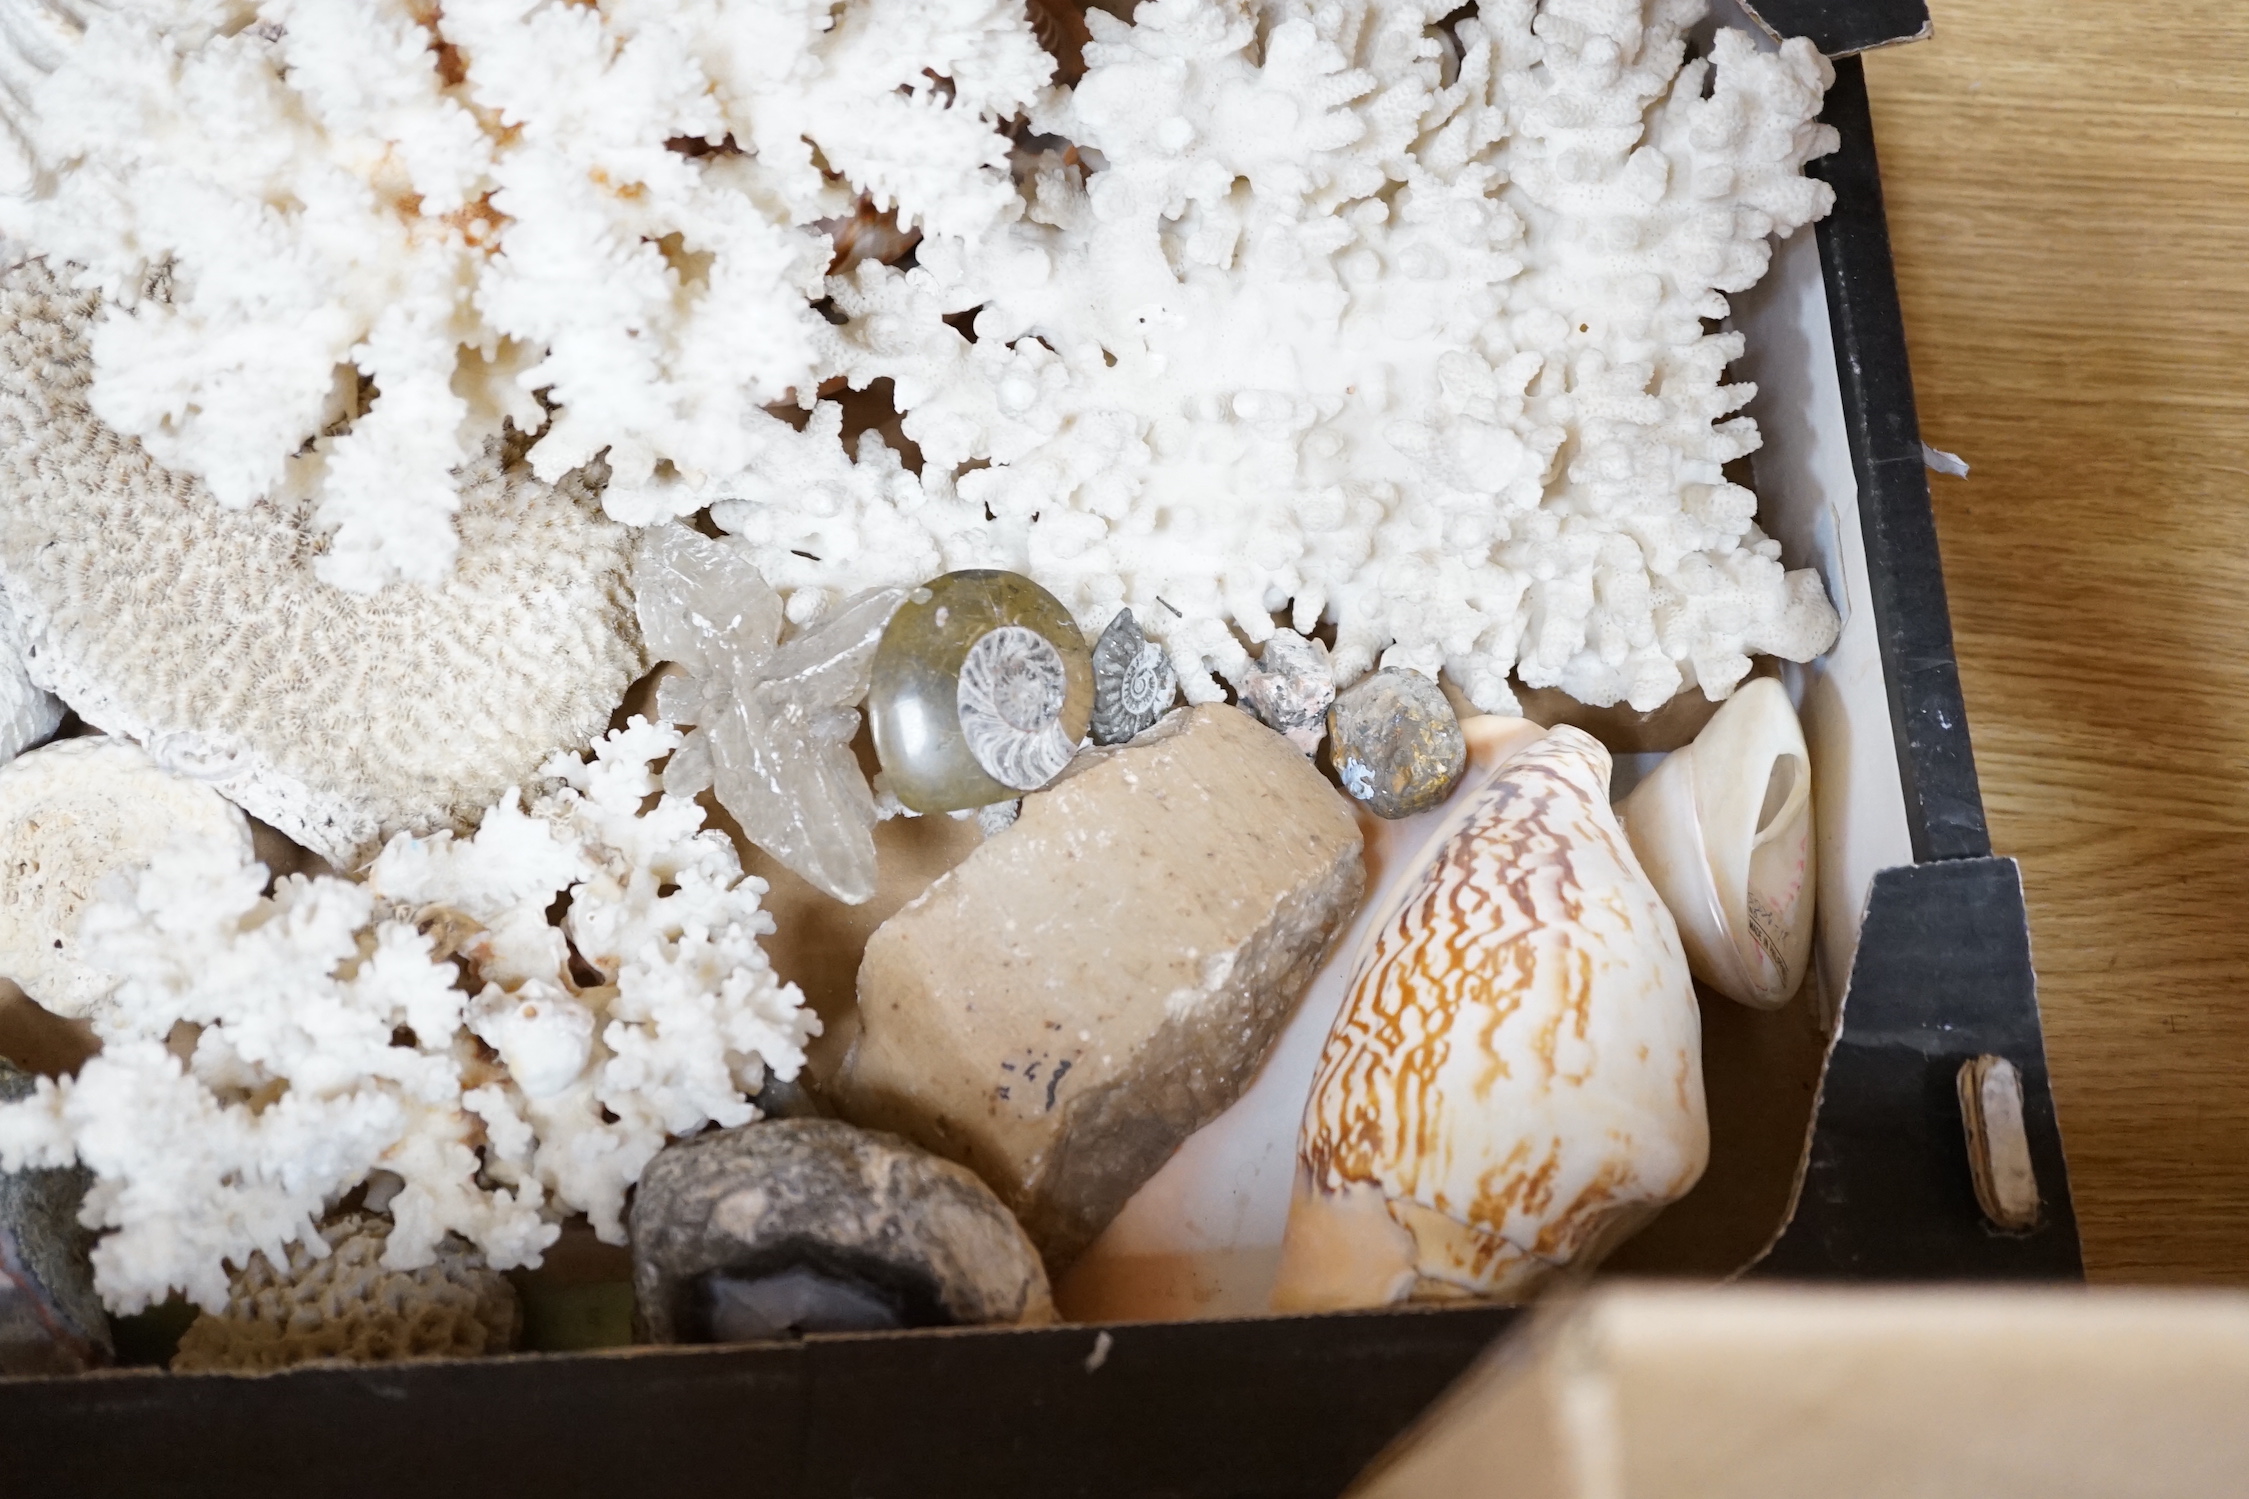 A group of various sea shells, corals, fossils etc.